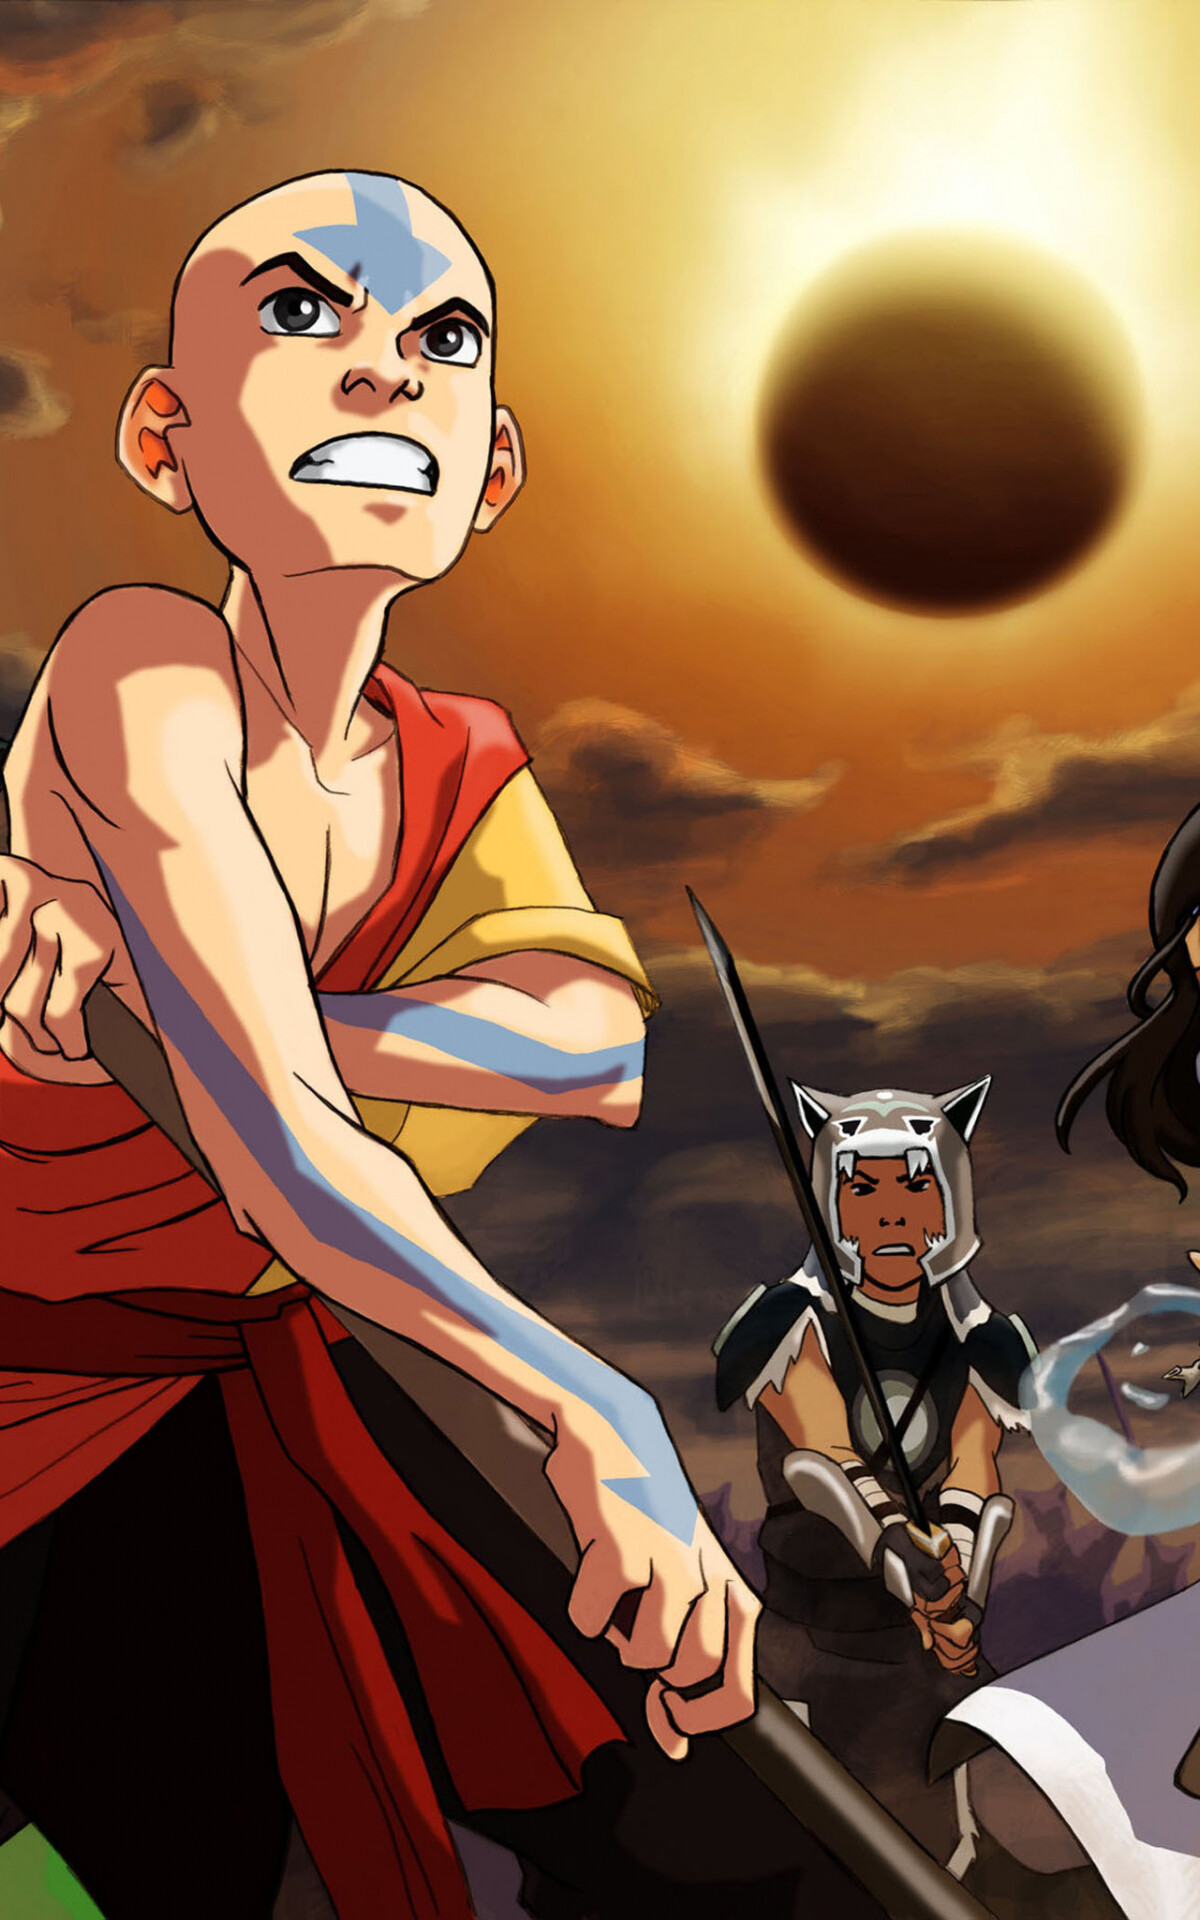 Avatar: The Last Airbender: The Water Tribes, the Earth Kingdom, the Fire Nation, and the Air Nomads. 1200x1920 HD Wallpaper.